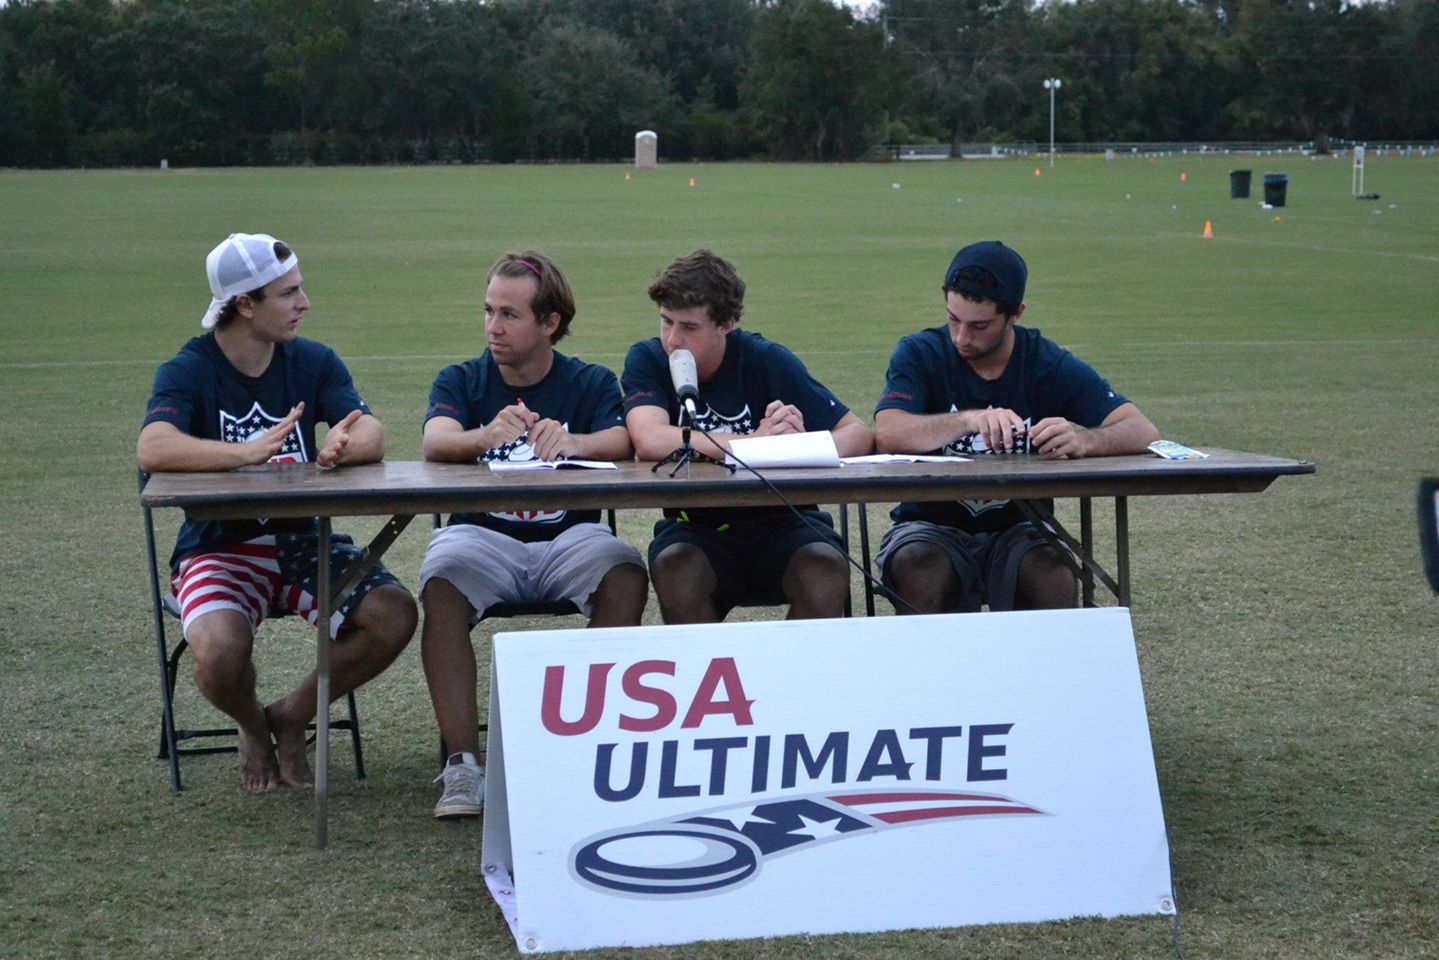 Skyd at the 2011 Club Championships. (From left: Elliot Trotter, Tyler Kinley, Ian Toner, Zack Smith.)